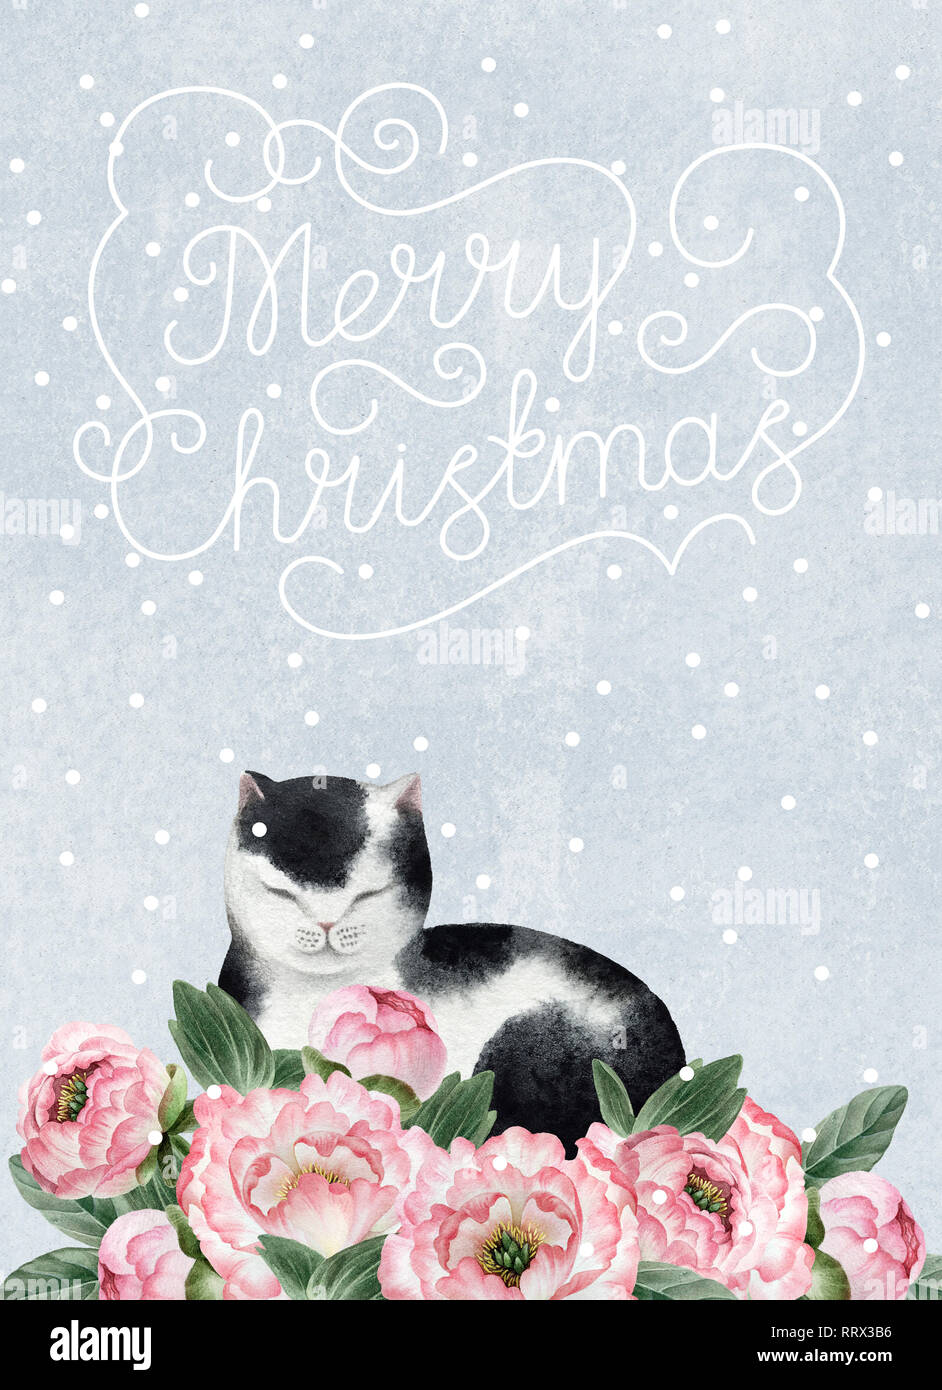 Greeting postcard with cute watercolor cat. Fat cat isolated on blue background with snowflakes for design, postcards, banners. Stock Photo